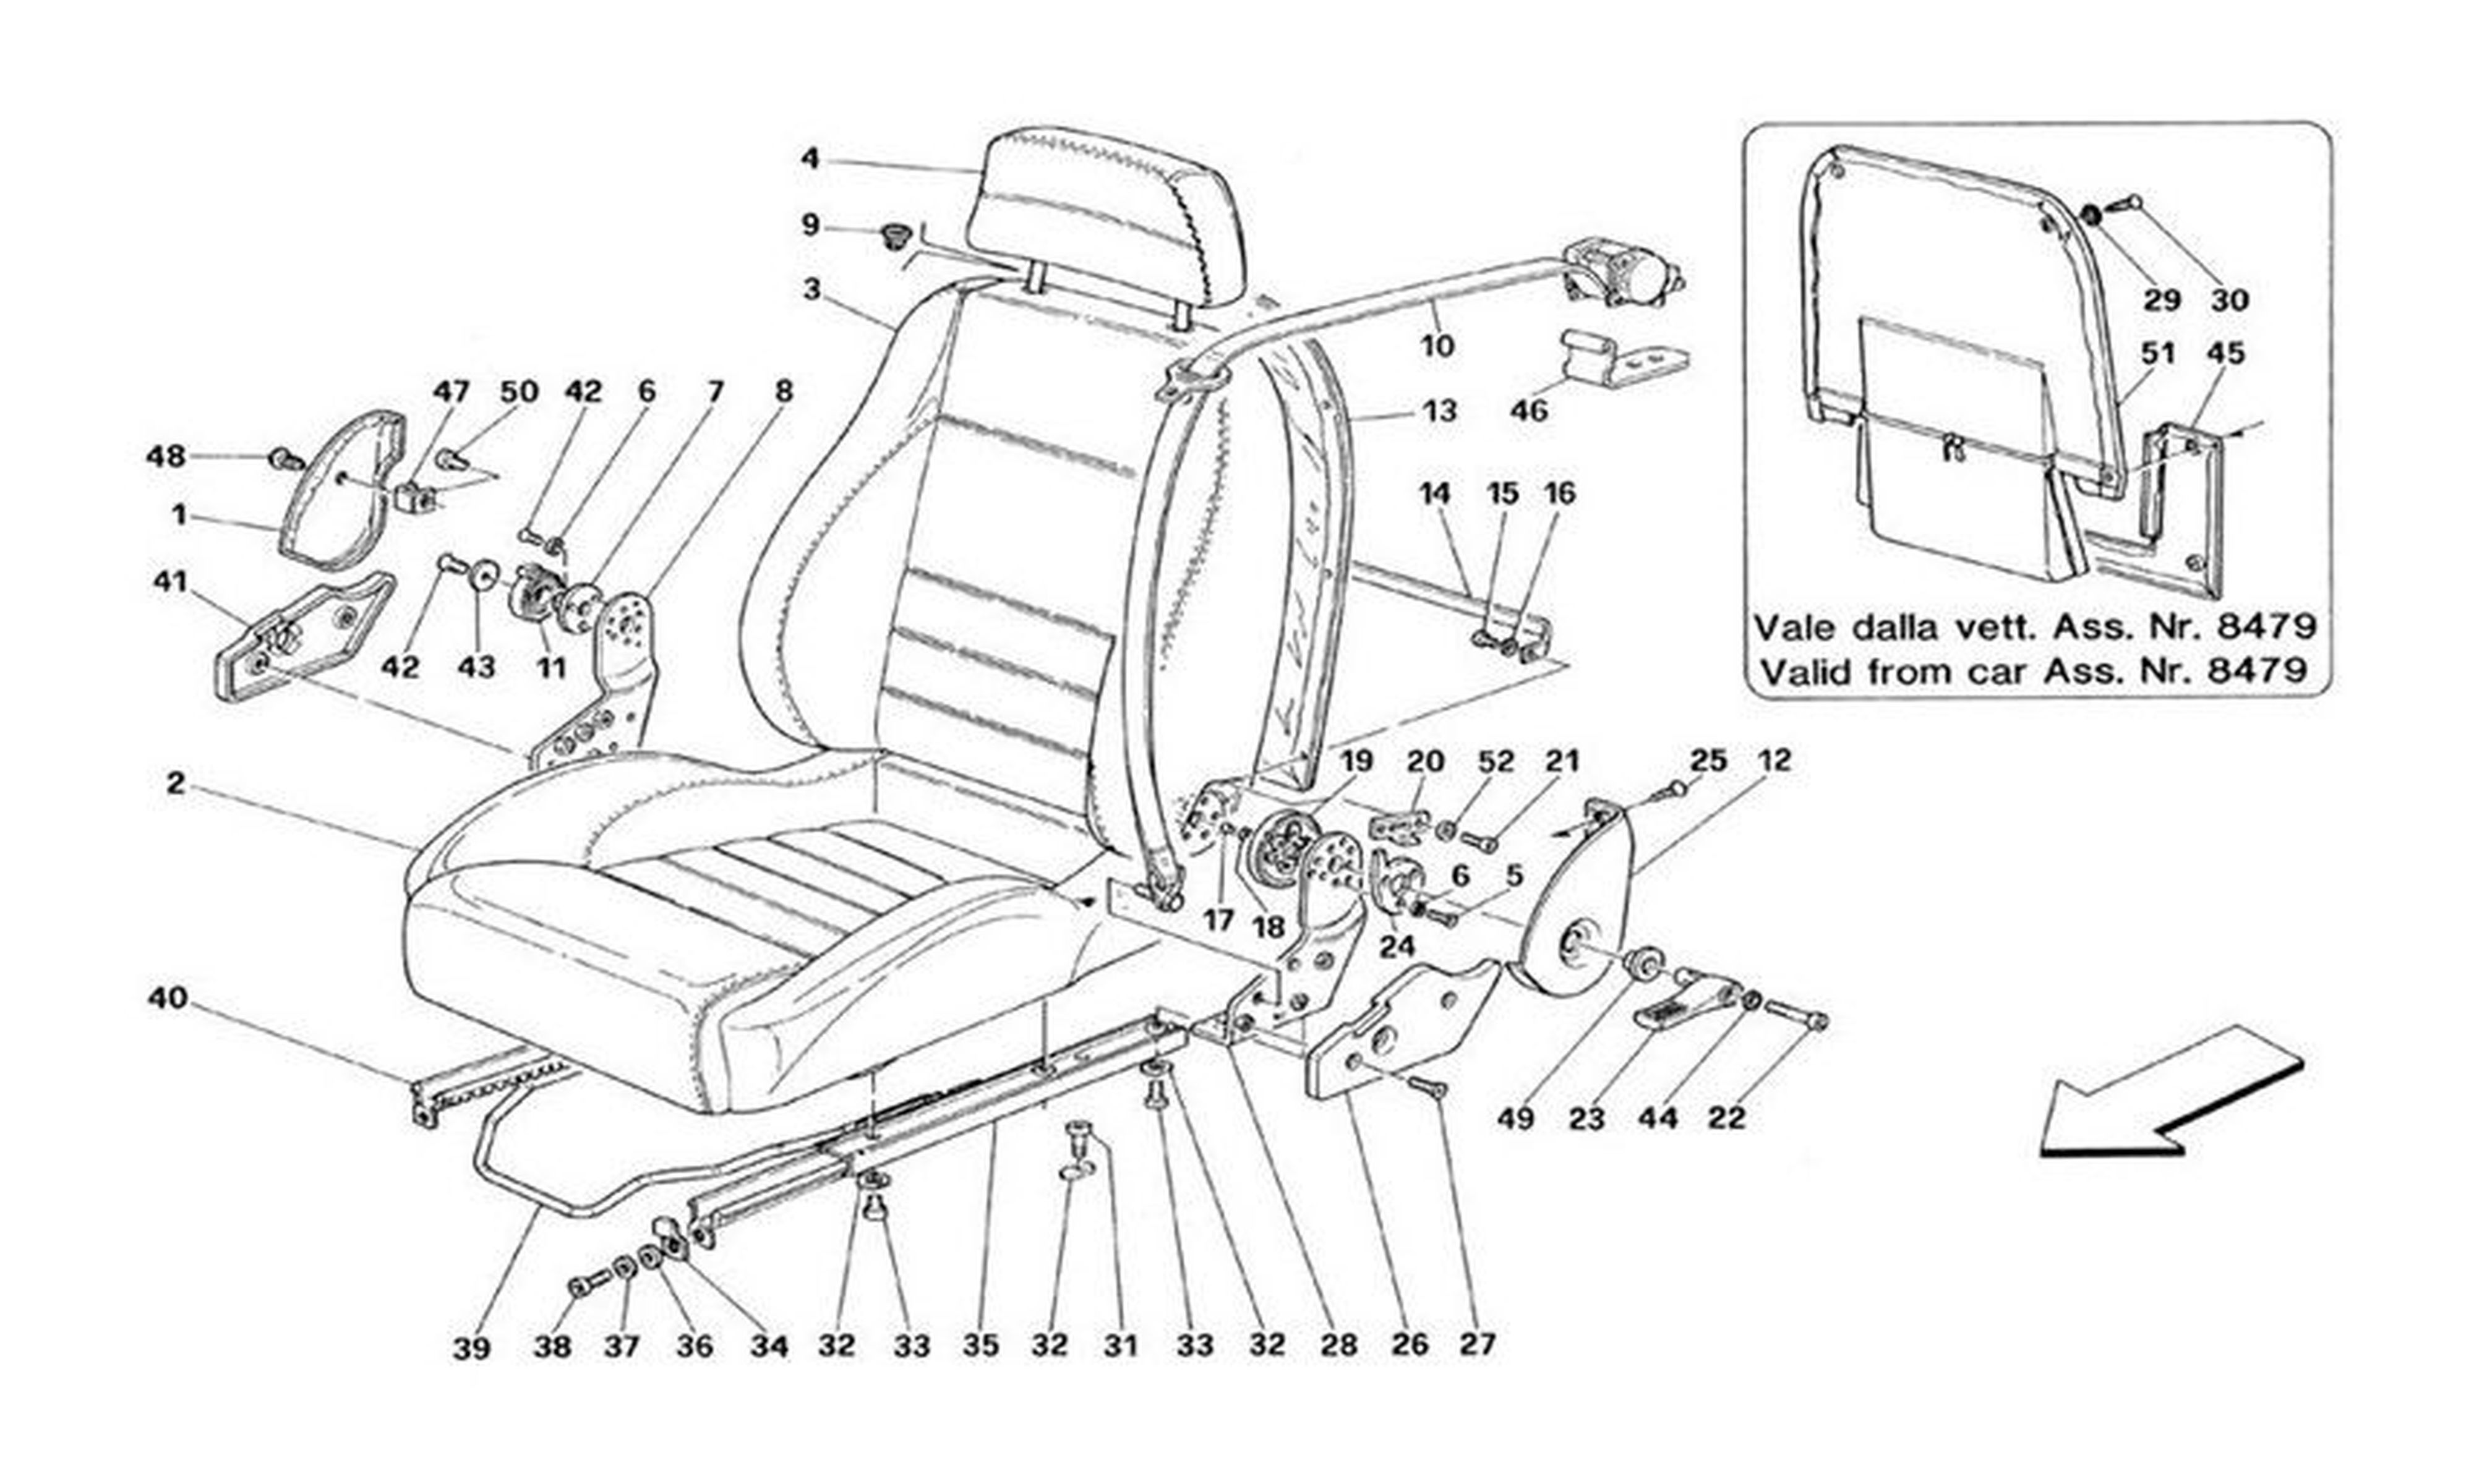 Schematic: Seats And Safety Belts - Not For Cars With Passive Safety Belts - Valid Till Car Ass. Nr. 5277